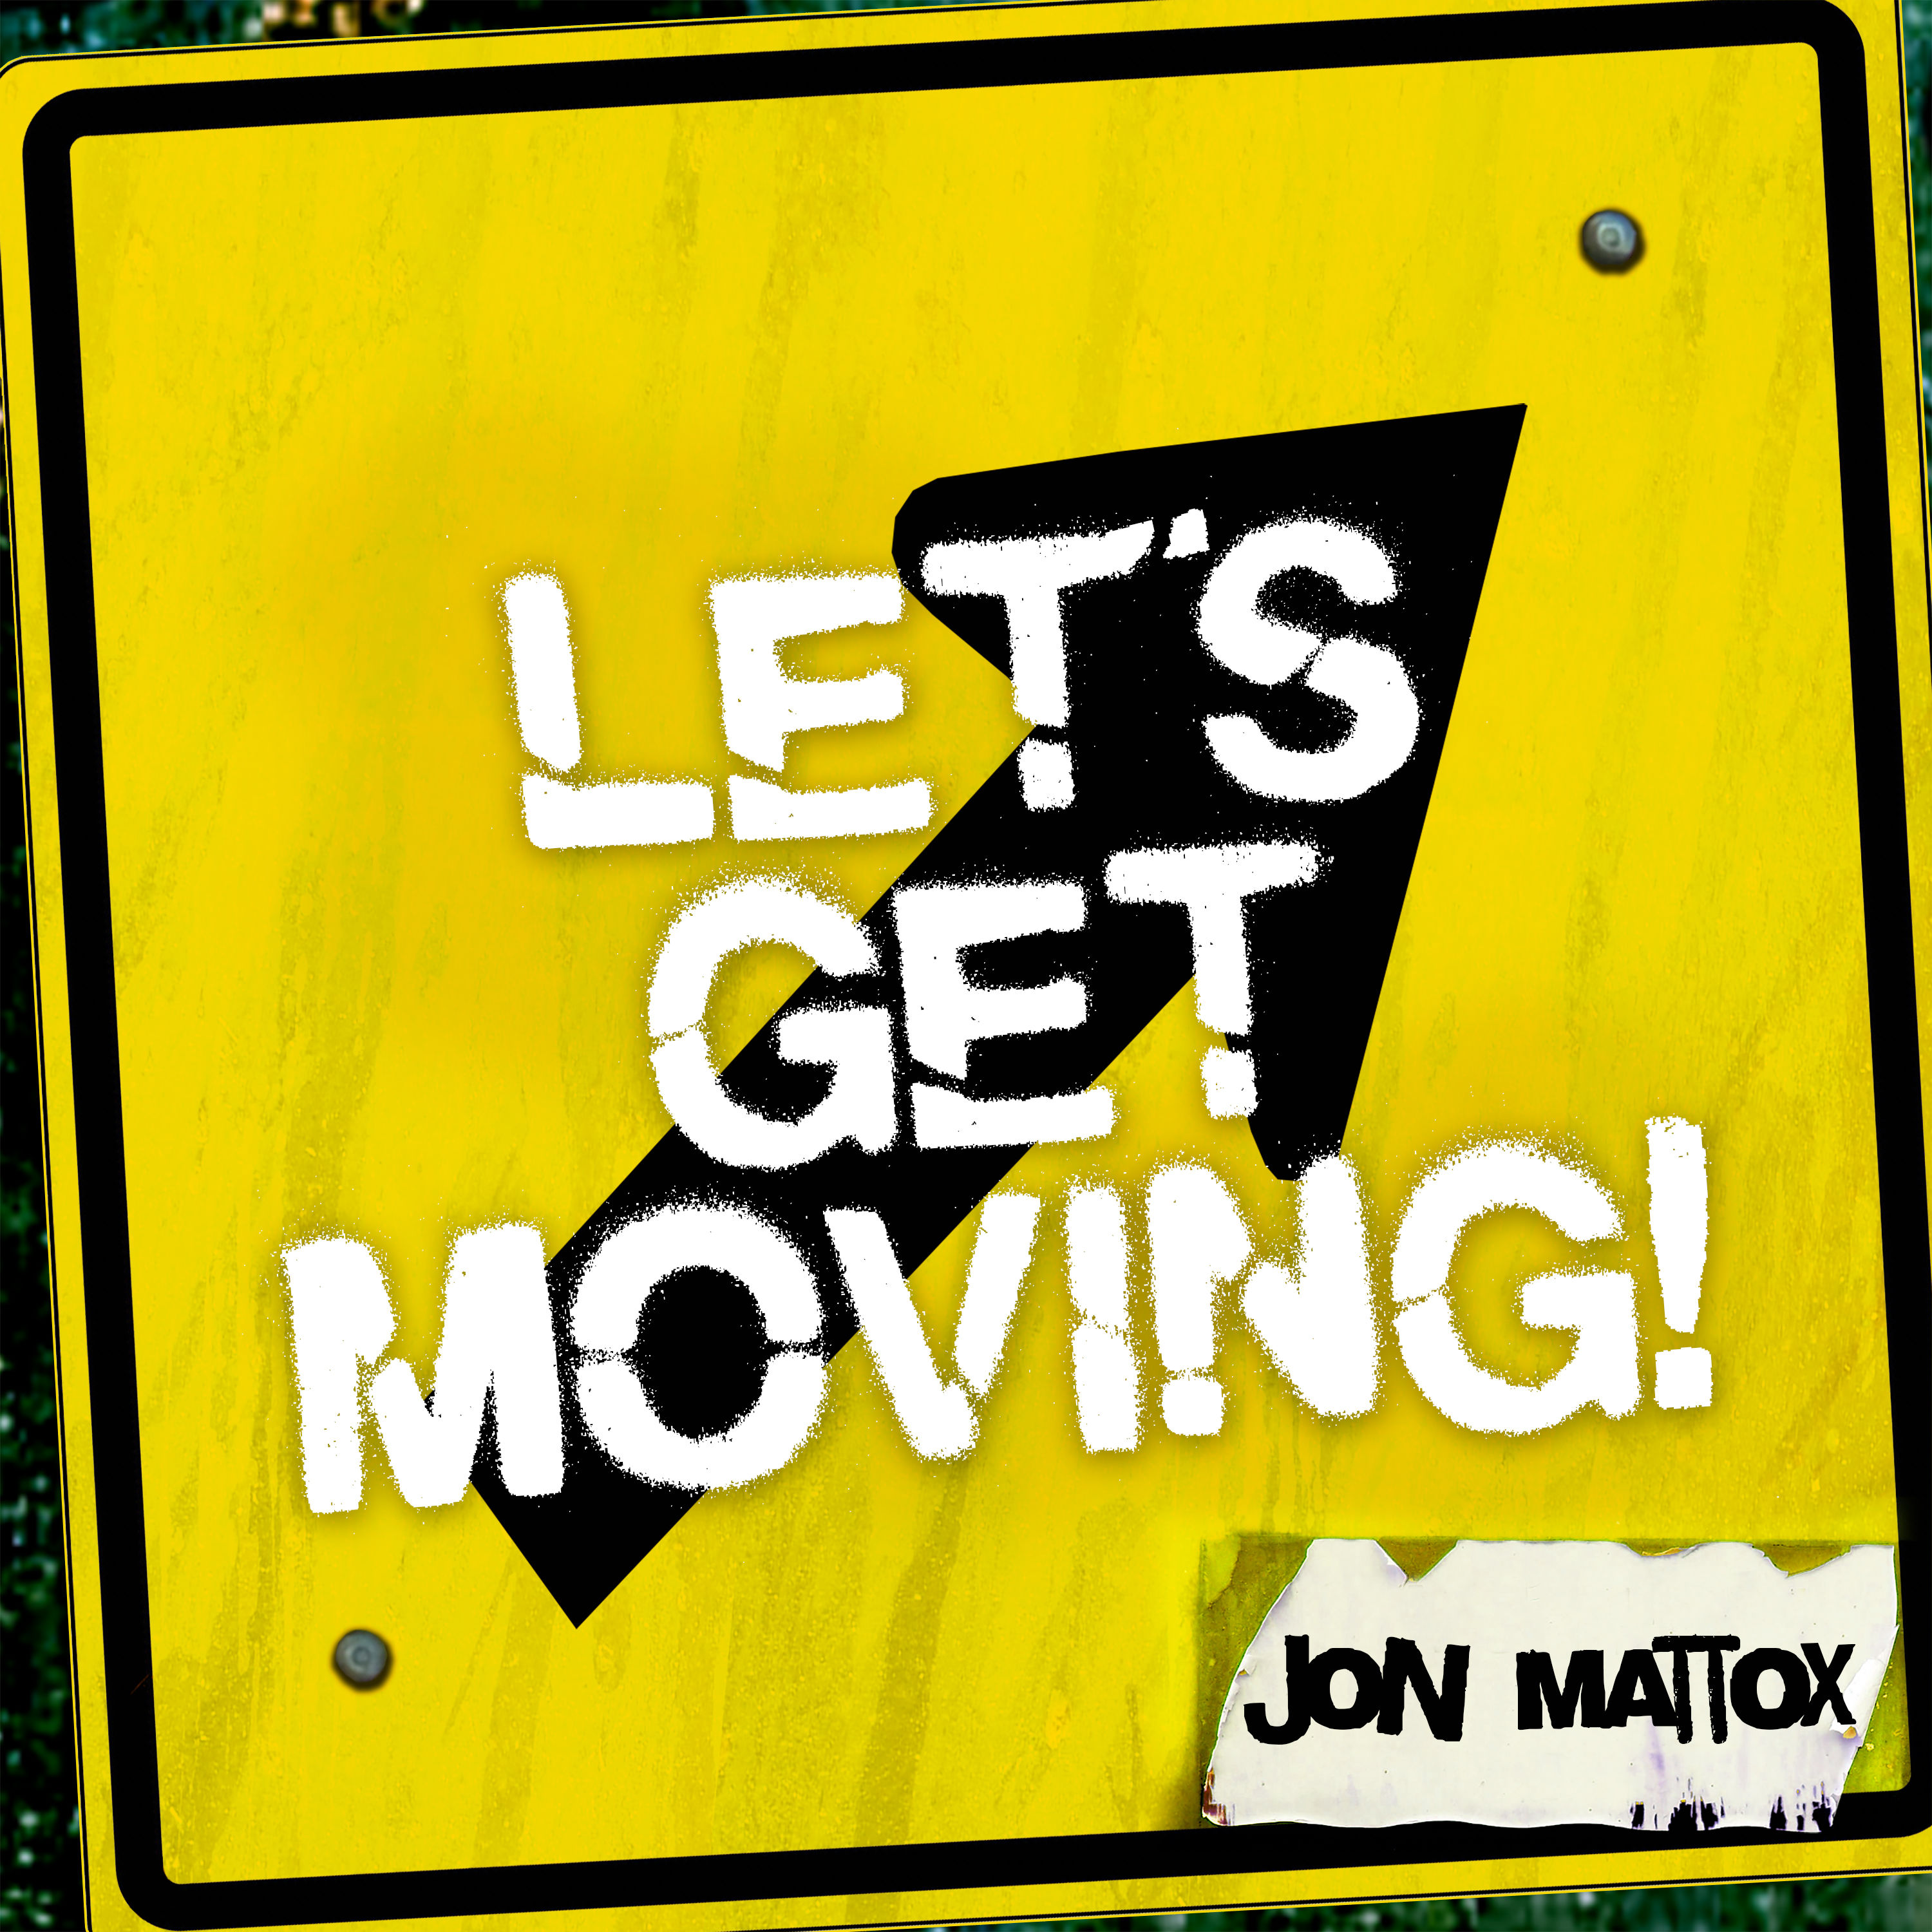 Let s get this. Matox. Lets get moving перевод. We got the moves. You got to Let the Music move your feet.